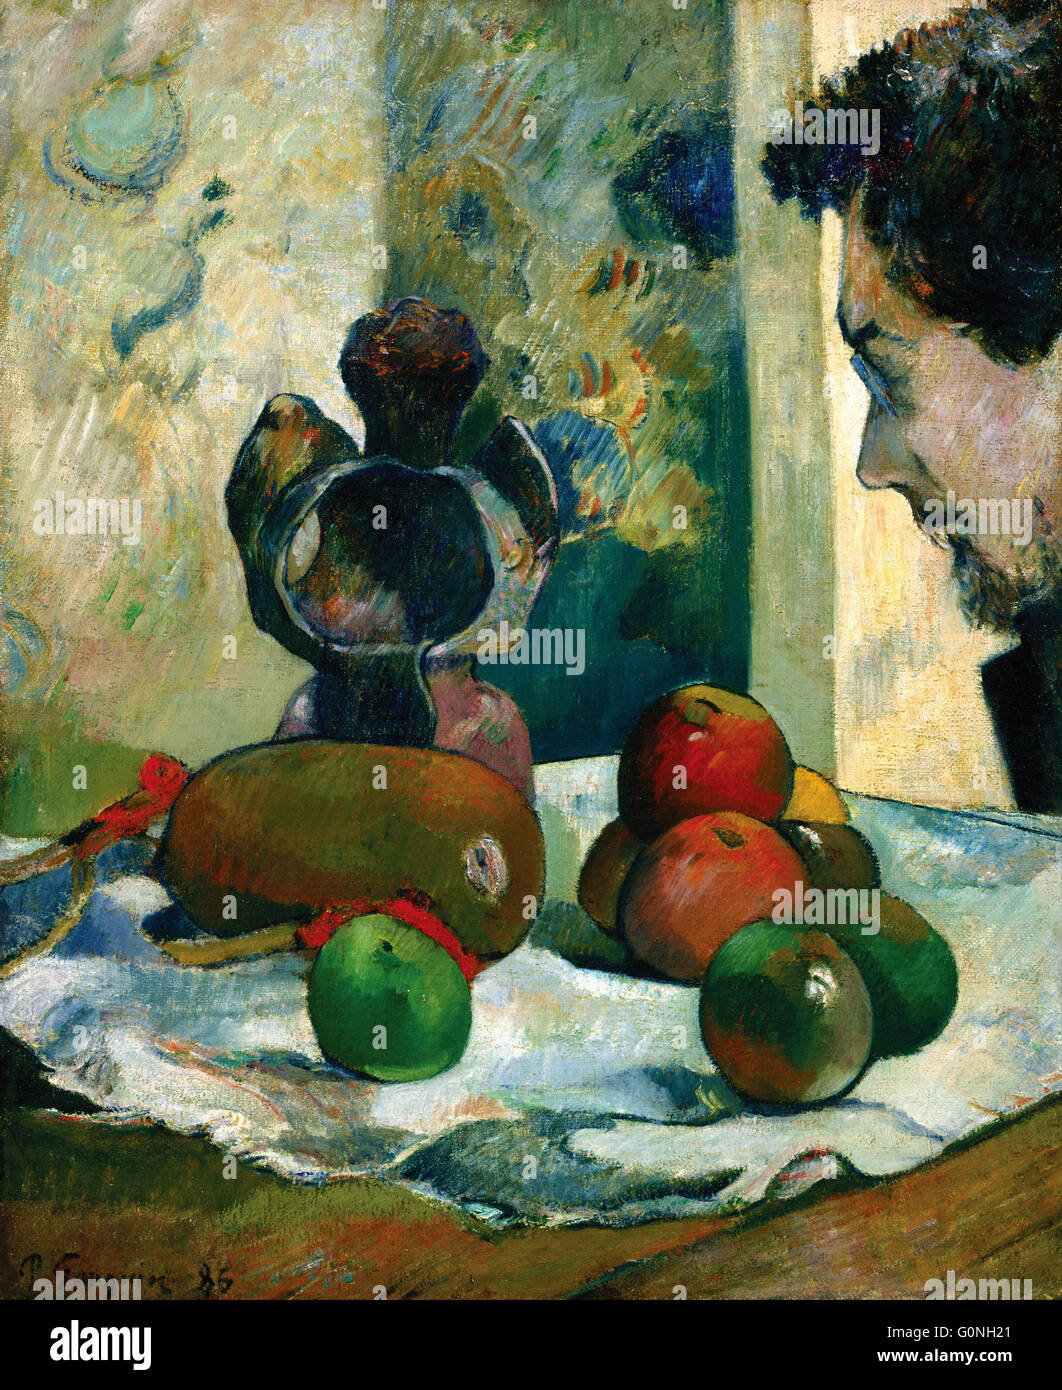 Gauguin, Paul - Still Life with Profile of Laval Stock Photo